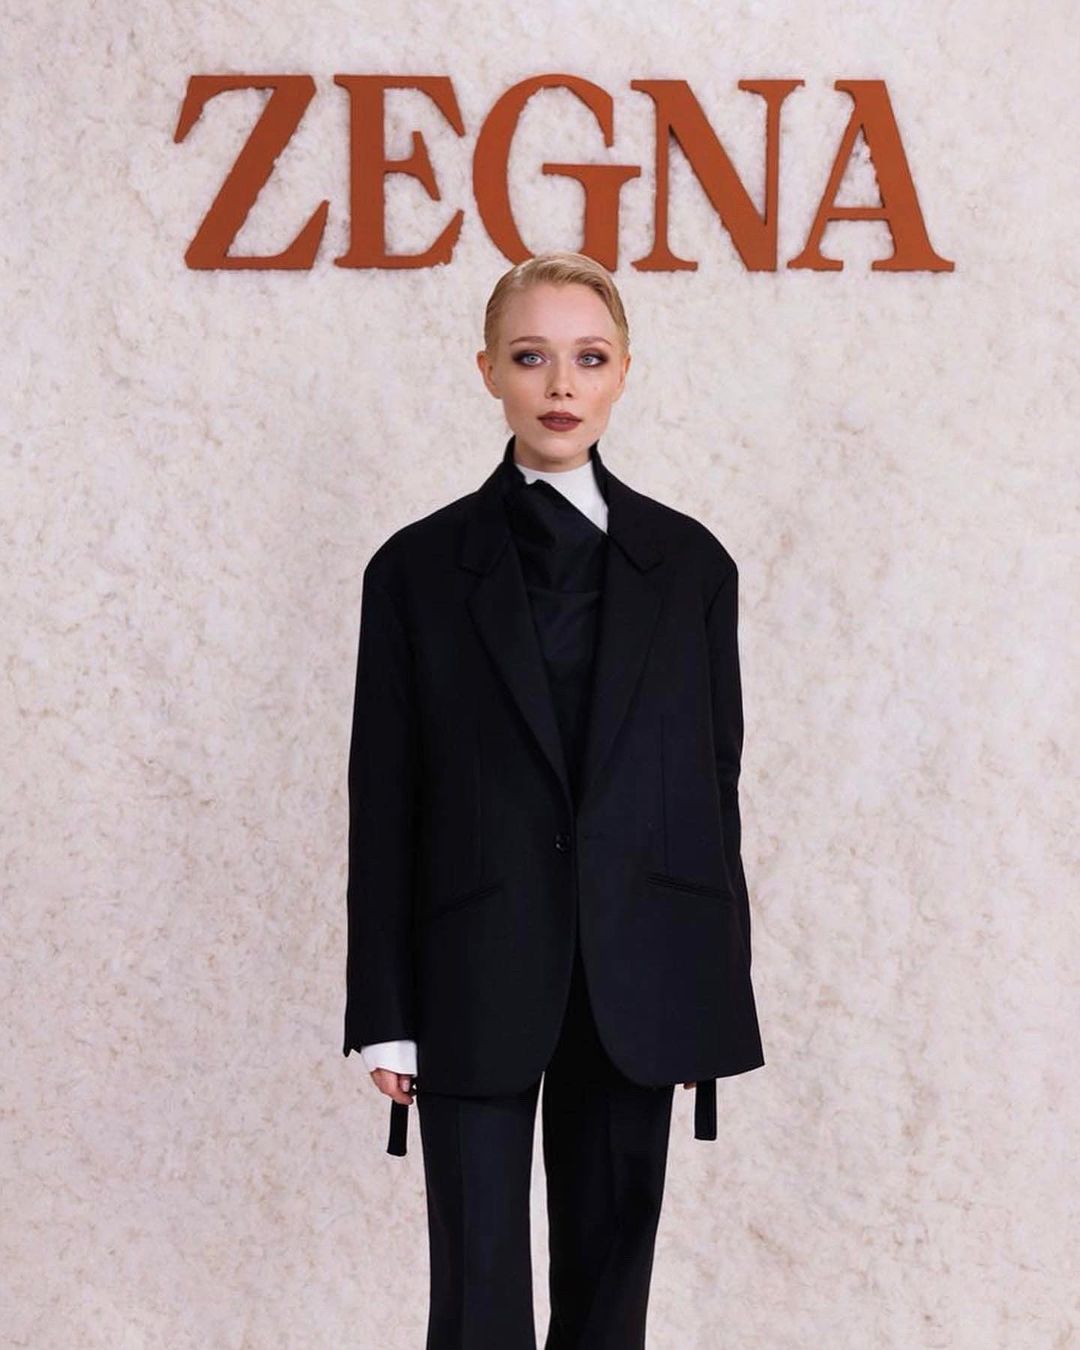 Ivanna Sakhno at an event for Zegna